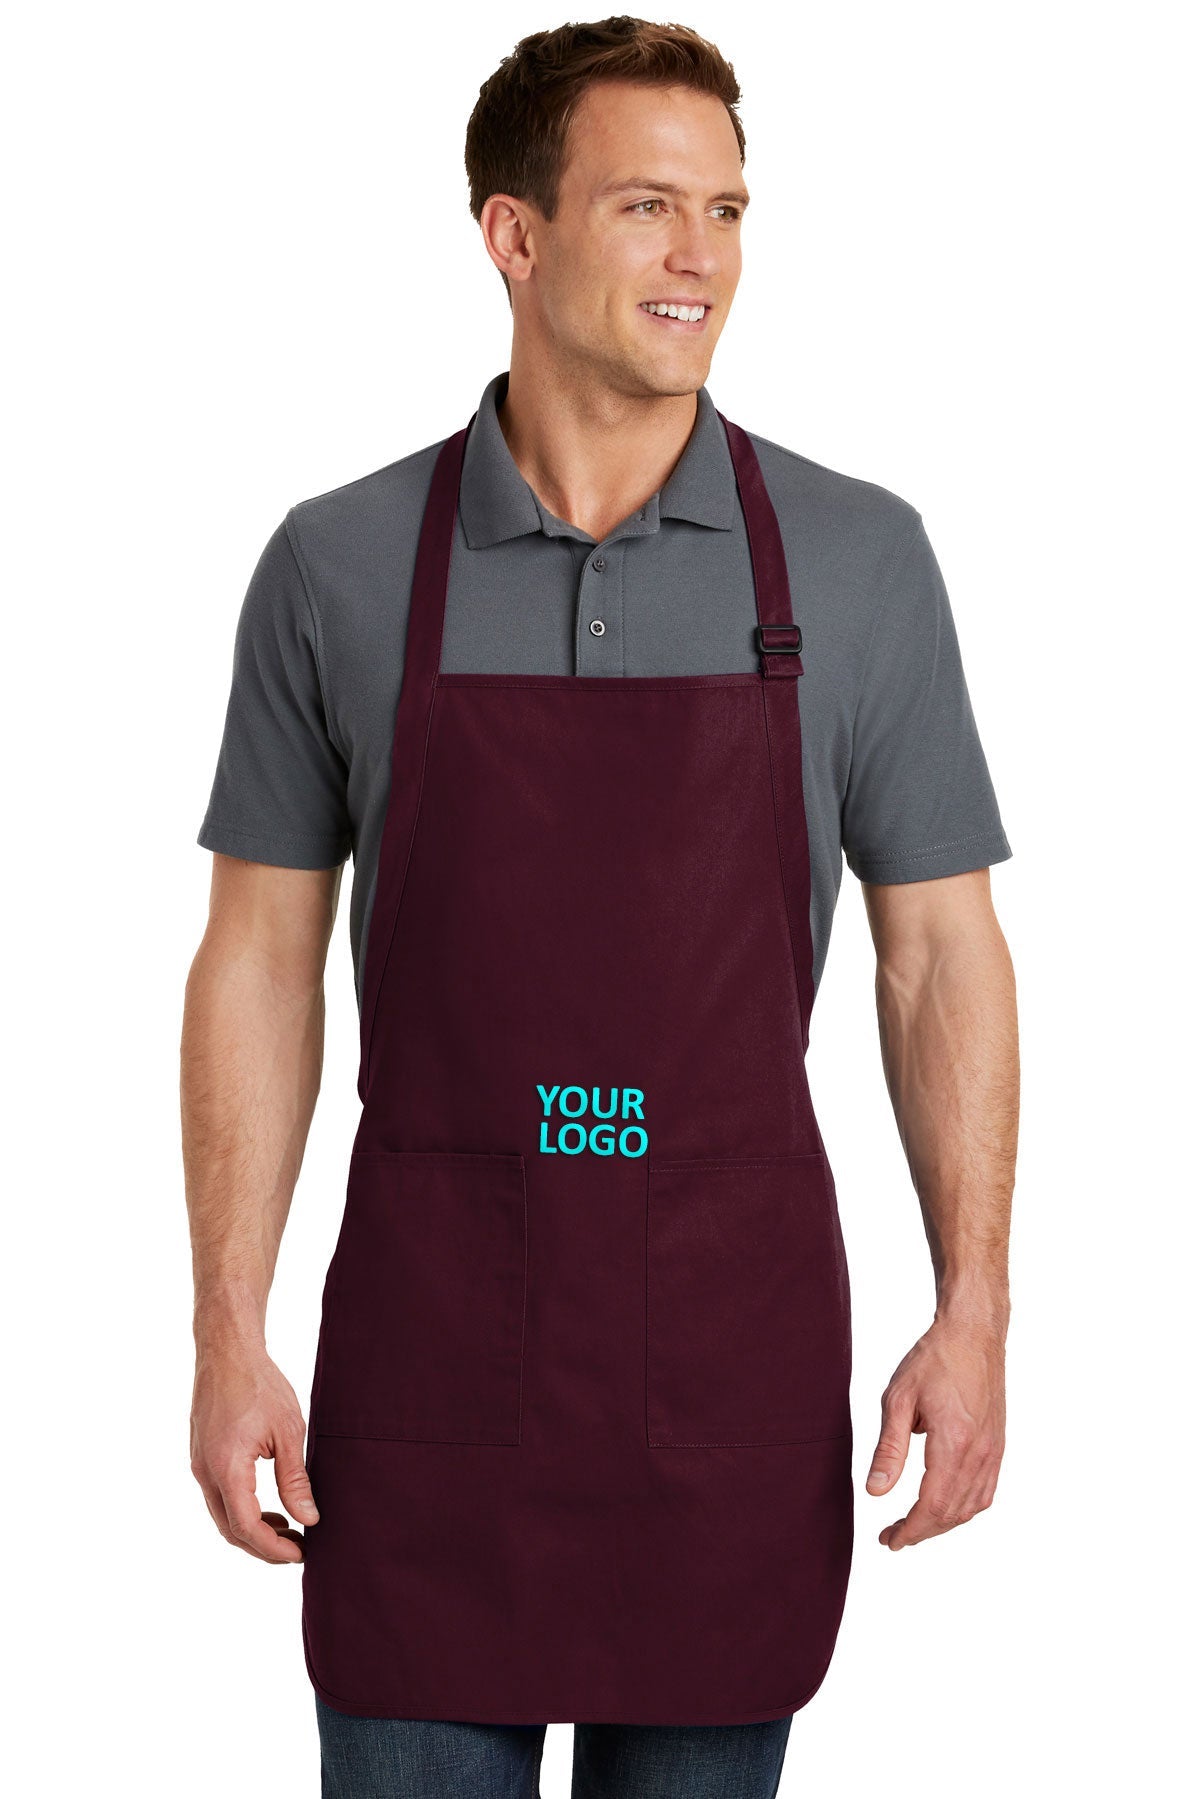 Port Authority Full-Length Apron with Pockets